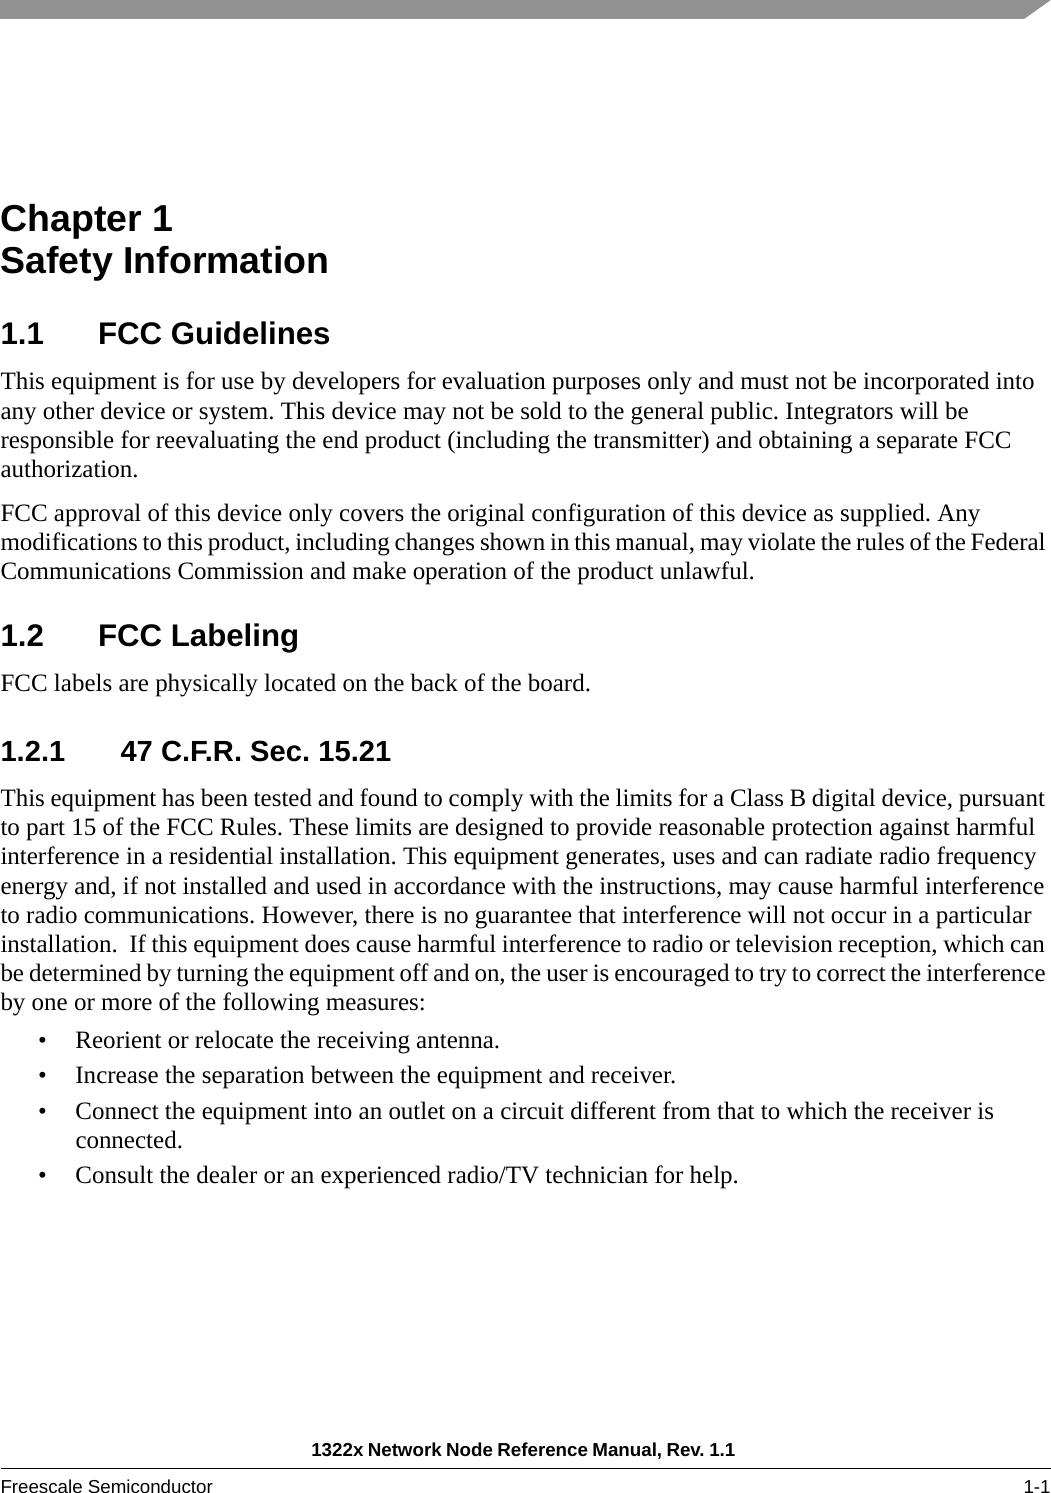 1322x Network Node Reference Manual, Rev. 1.1 Freescale Semiconductor 1-1Chapter 1  Safety Information1.1 FCC GuidelinesThis equipment is for use by developers for evaluation purposes only and must not be incorporated into any other device or system. This device may not be sold to the general public. Integrators will be responsible for reevaluating the end product (including the transmitter) and obtaining a separate FCC authorization.FCC approval of this device only covers the original configuration of this device as supplied. Any modifications to this product, including changes shown in this manual, may violate the rules of the Federal Communications Commission and make operation of the product unlawful.1.2 FCC LabelingFCC labels are physically located on the back of the board.1.2.1 47 C.F.R. Sec. 15.21This equipment has been tested and found to comply with the limits for a Class B digital device, pursuant to part 15 of the FCC Rules. These limits are designed to provide reasonable protection against harmful interference in a residential installation. This equipment generates, uses and can radiate radio frequency energy and, if not installed and used in accordance with the instructions, may cause harmful interference to radio communications. However, there is no guarantee that interference will not occur in a particular installation.  If this equipment does cause harmful interference to radio or television reception, which can be determined by turning the equipment off and on, the user is encouraged to try to correct the interference by one or more of the following measures:• Reorient or relocate the receiving antenna.• Increase the separation between the equipment and receiver.• Connect the equipment into an outlet on a circuit different from that to which the receiver is connected.• Consult the dealer or an experienced radio/TV technician for help.